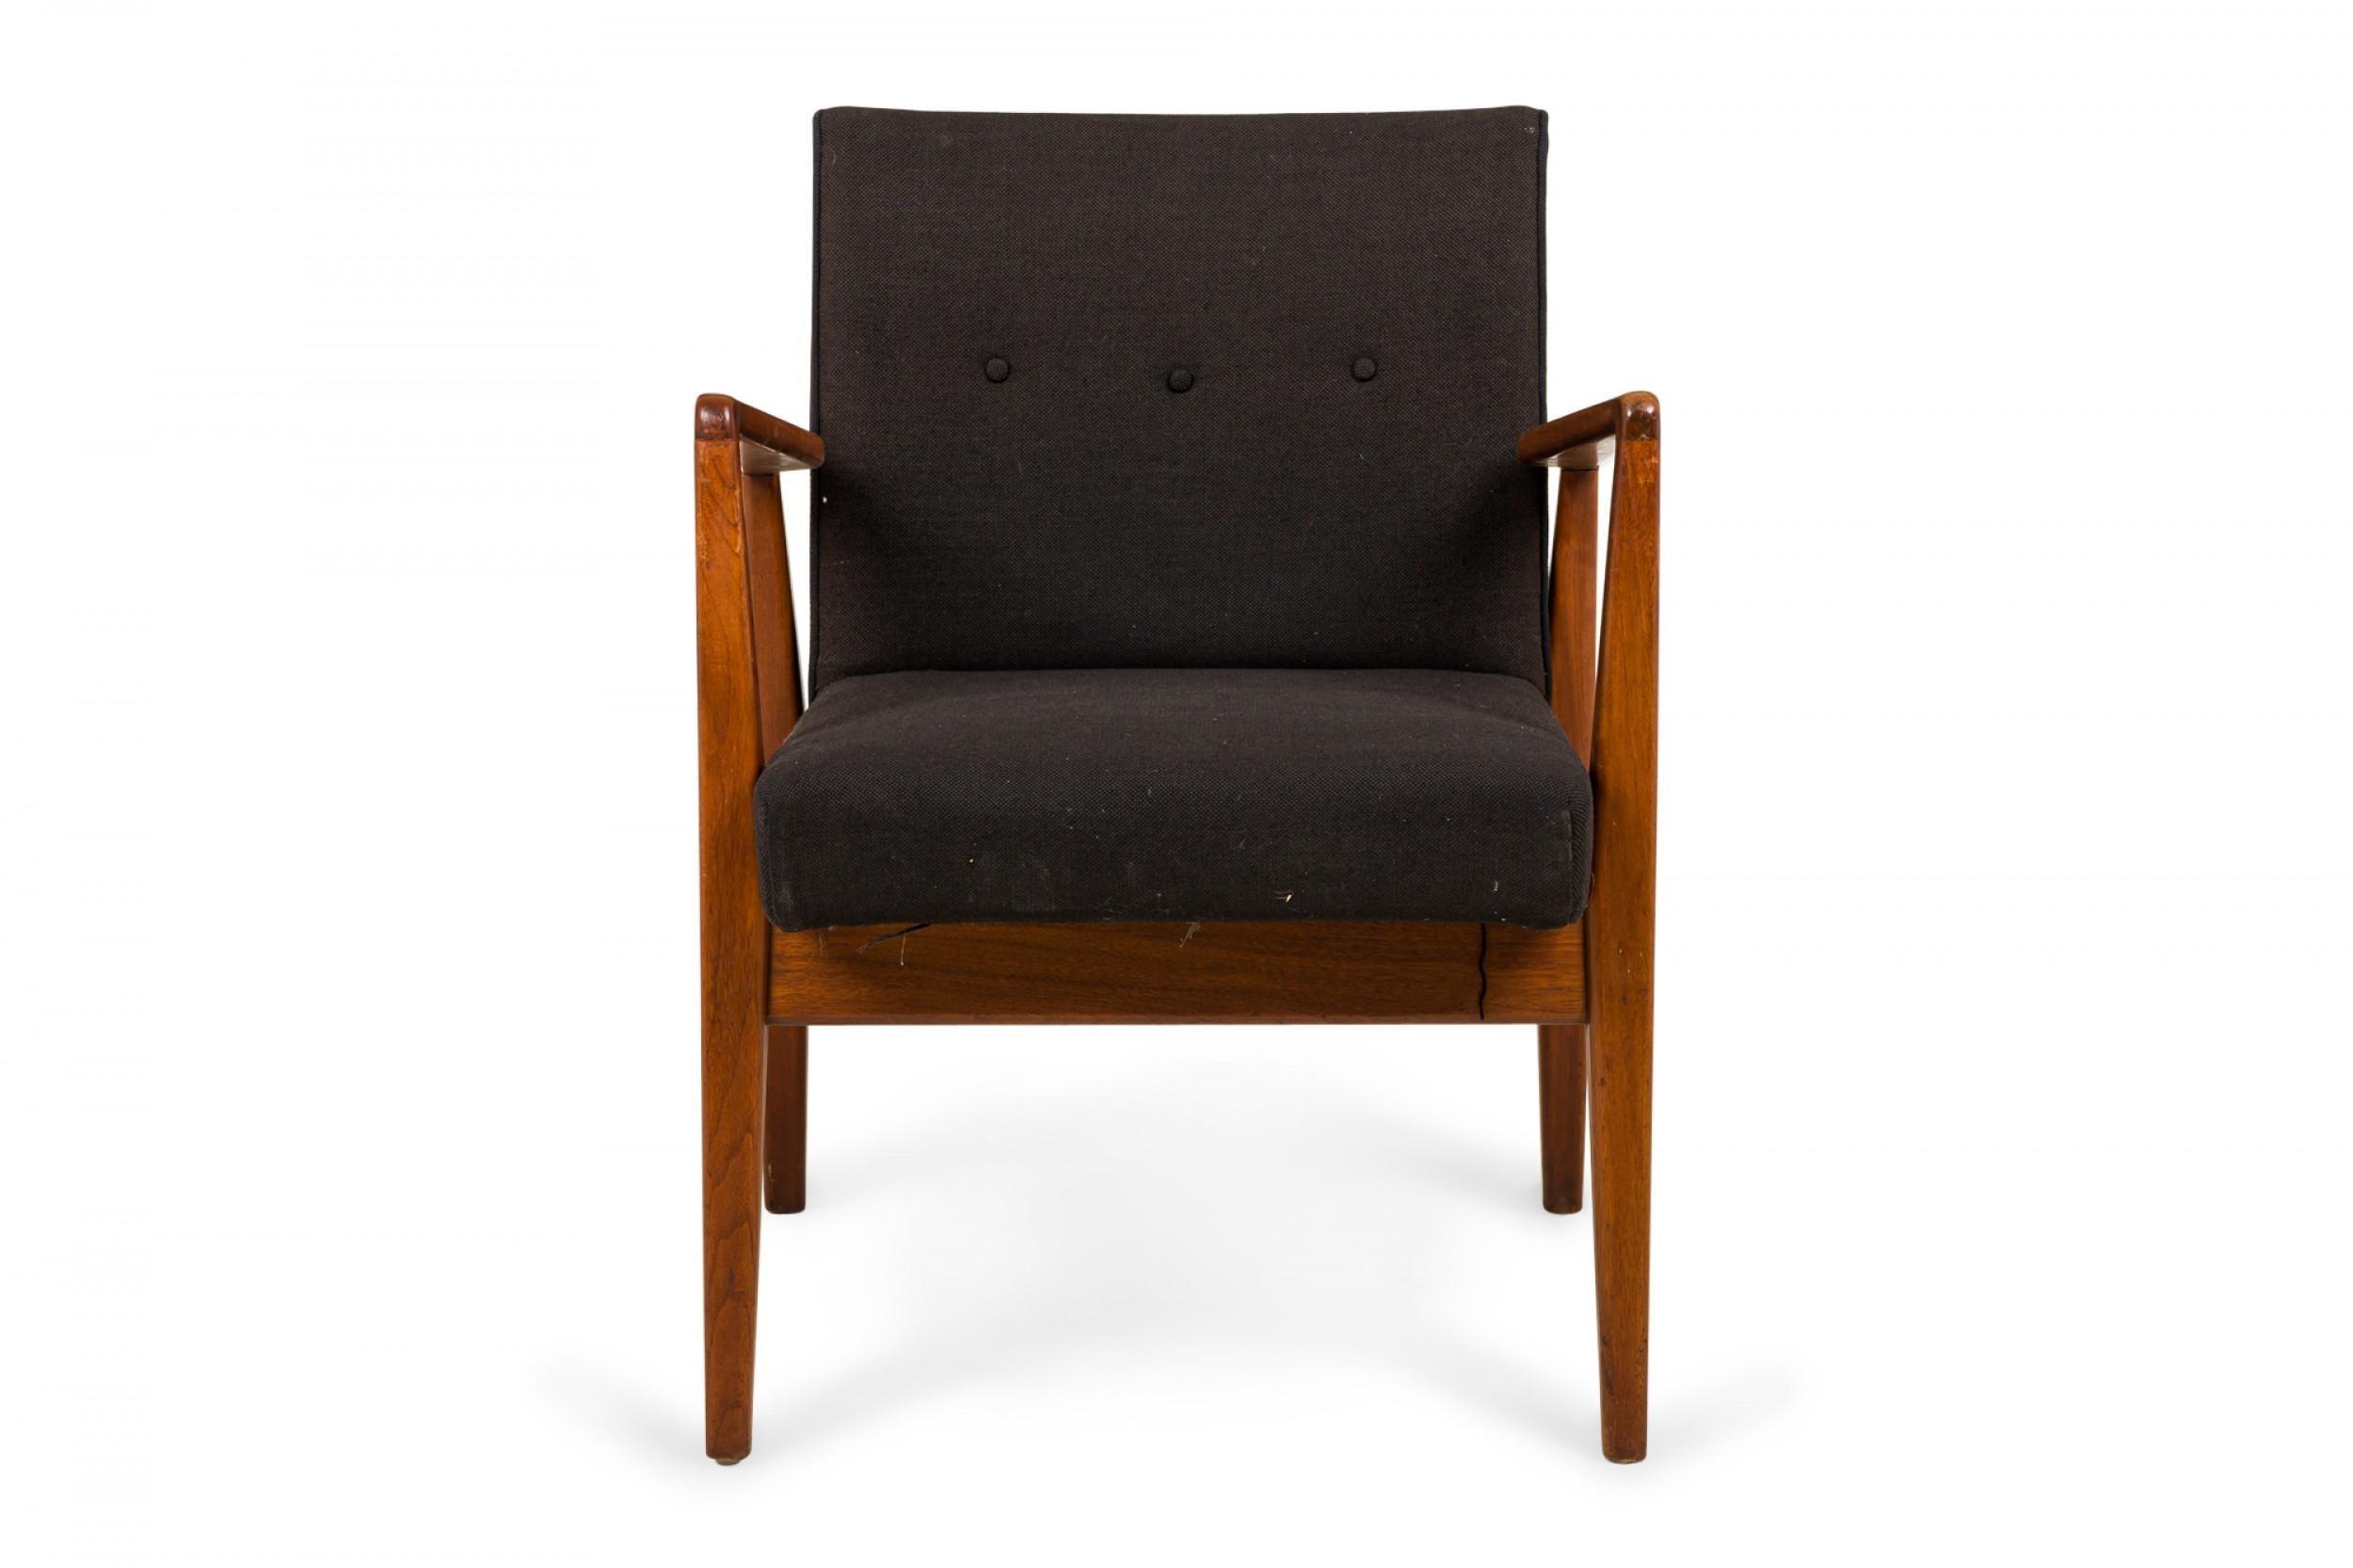 SET of 8 Danish Mid-Century 'Playboy' armchairs with angular teak wood frames and black woven fabric upholstered seats and backs with button tufting. (JENS RISOM)(PRICED AS SET)
